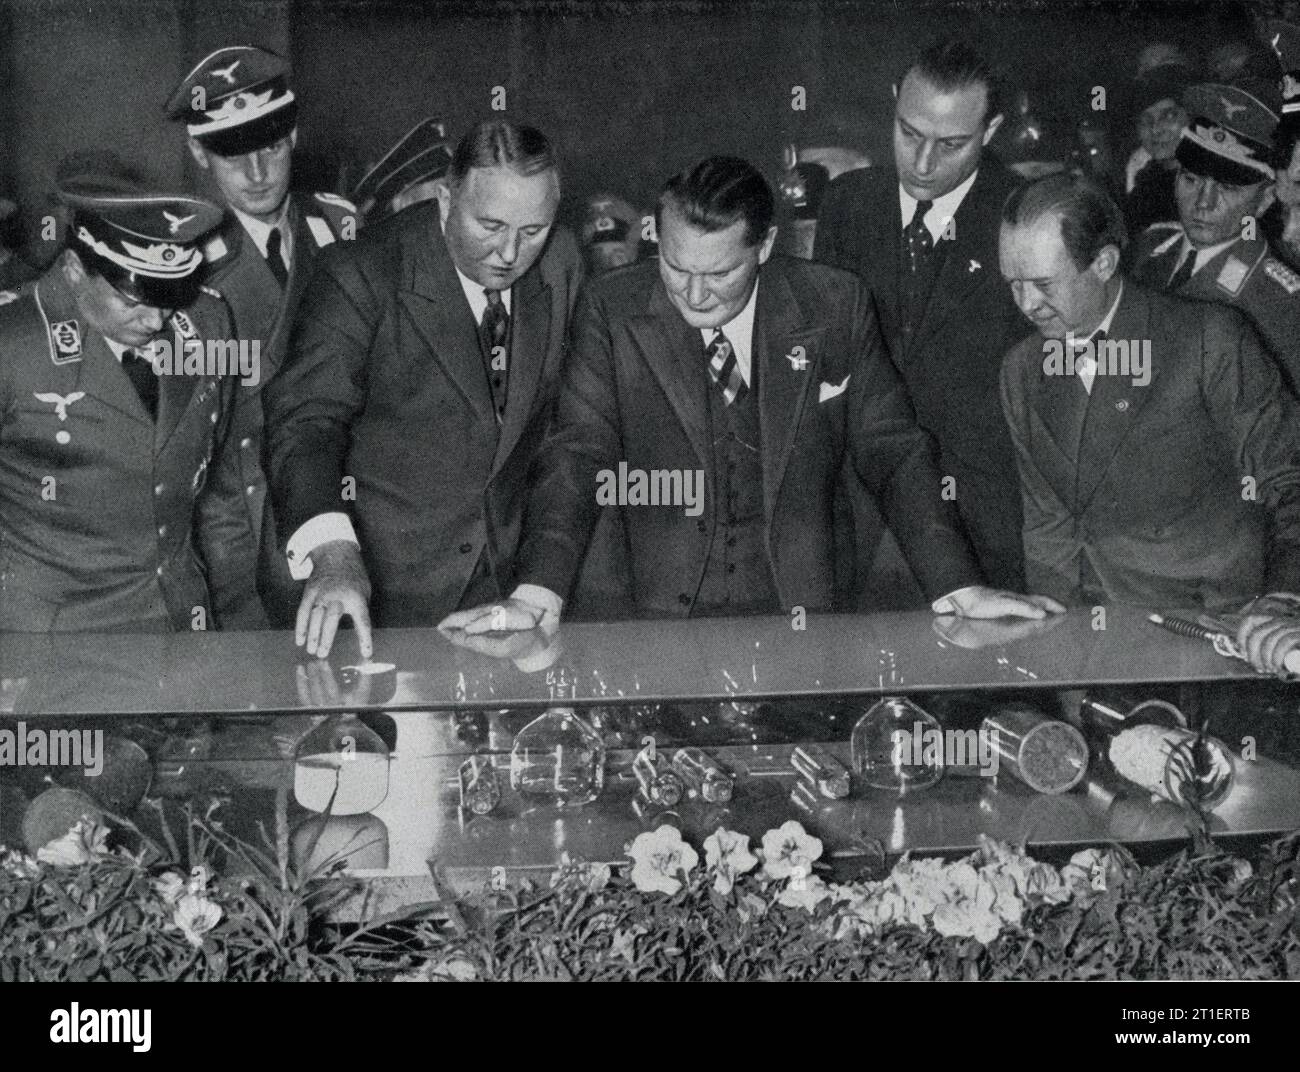 President of the Reich Association of the Motor Industry Dr. ALLMERS and Major General UDET with HERMANN GORING / GOERING examining synthetic rubber exhibits at the INTERNATIONALE AUTOMOBIL  UND MOTORRAD AUSTELLUNG / INTERNATIONAL CAR AND MOTORCYCLE EXHIBITION in Berlin Germany which ran from 20th February to 7th March 1937 Stock Photo